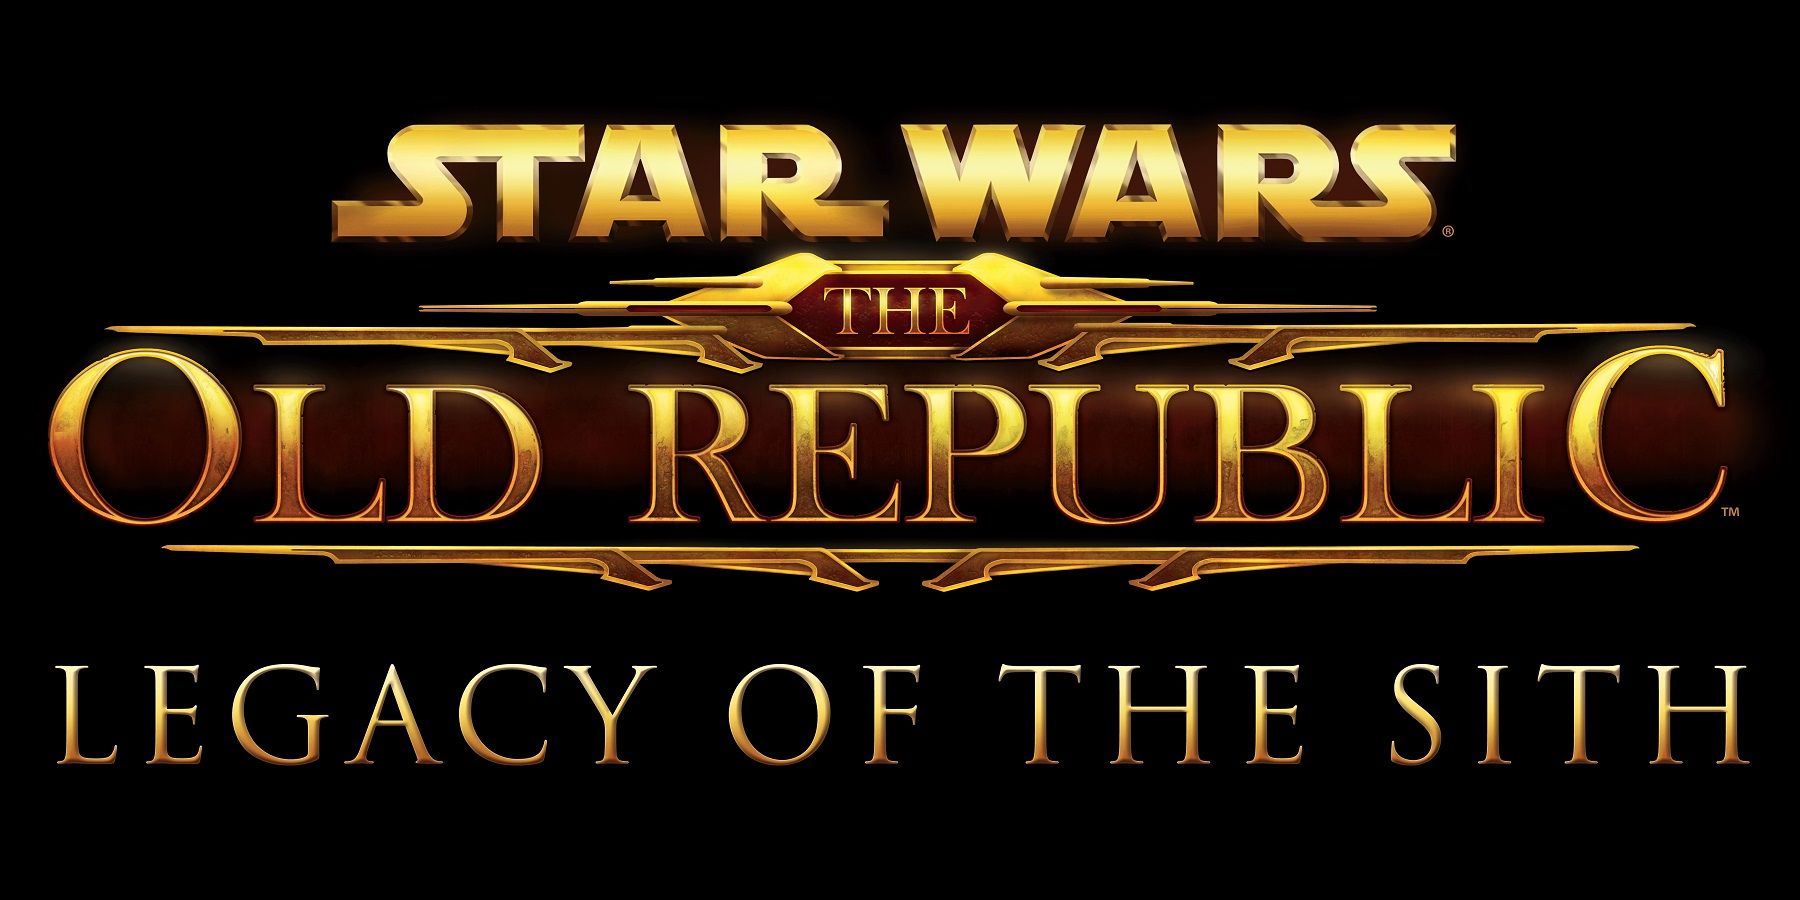 star wars the old republic legacy of the sith update expansion pack